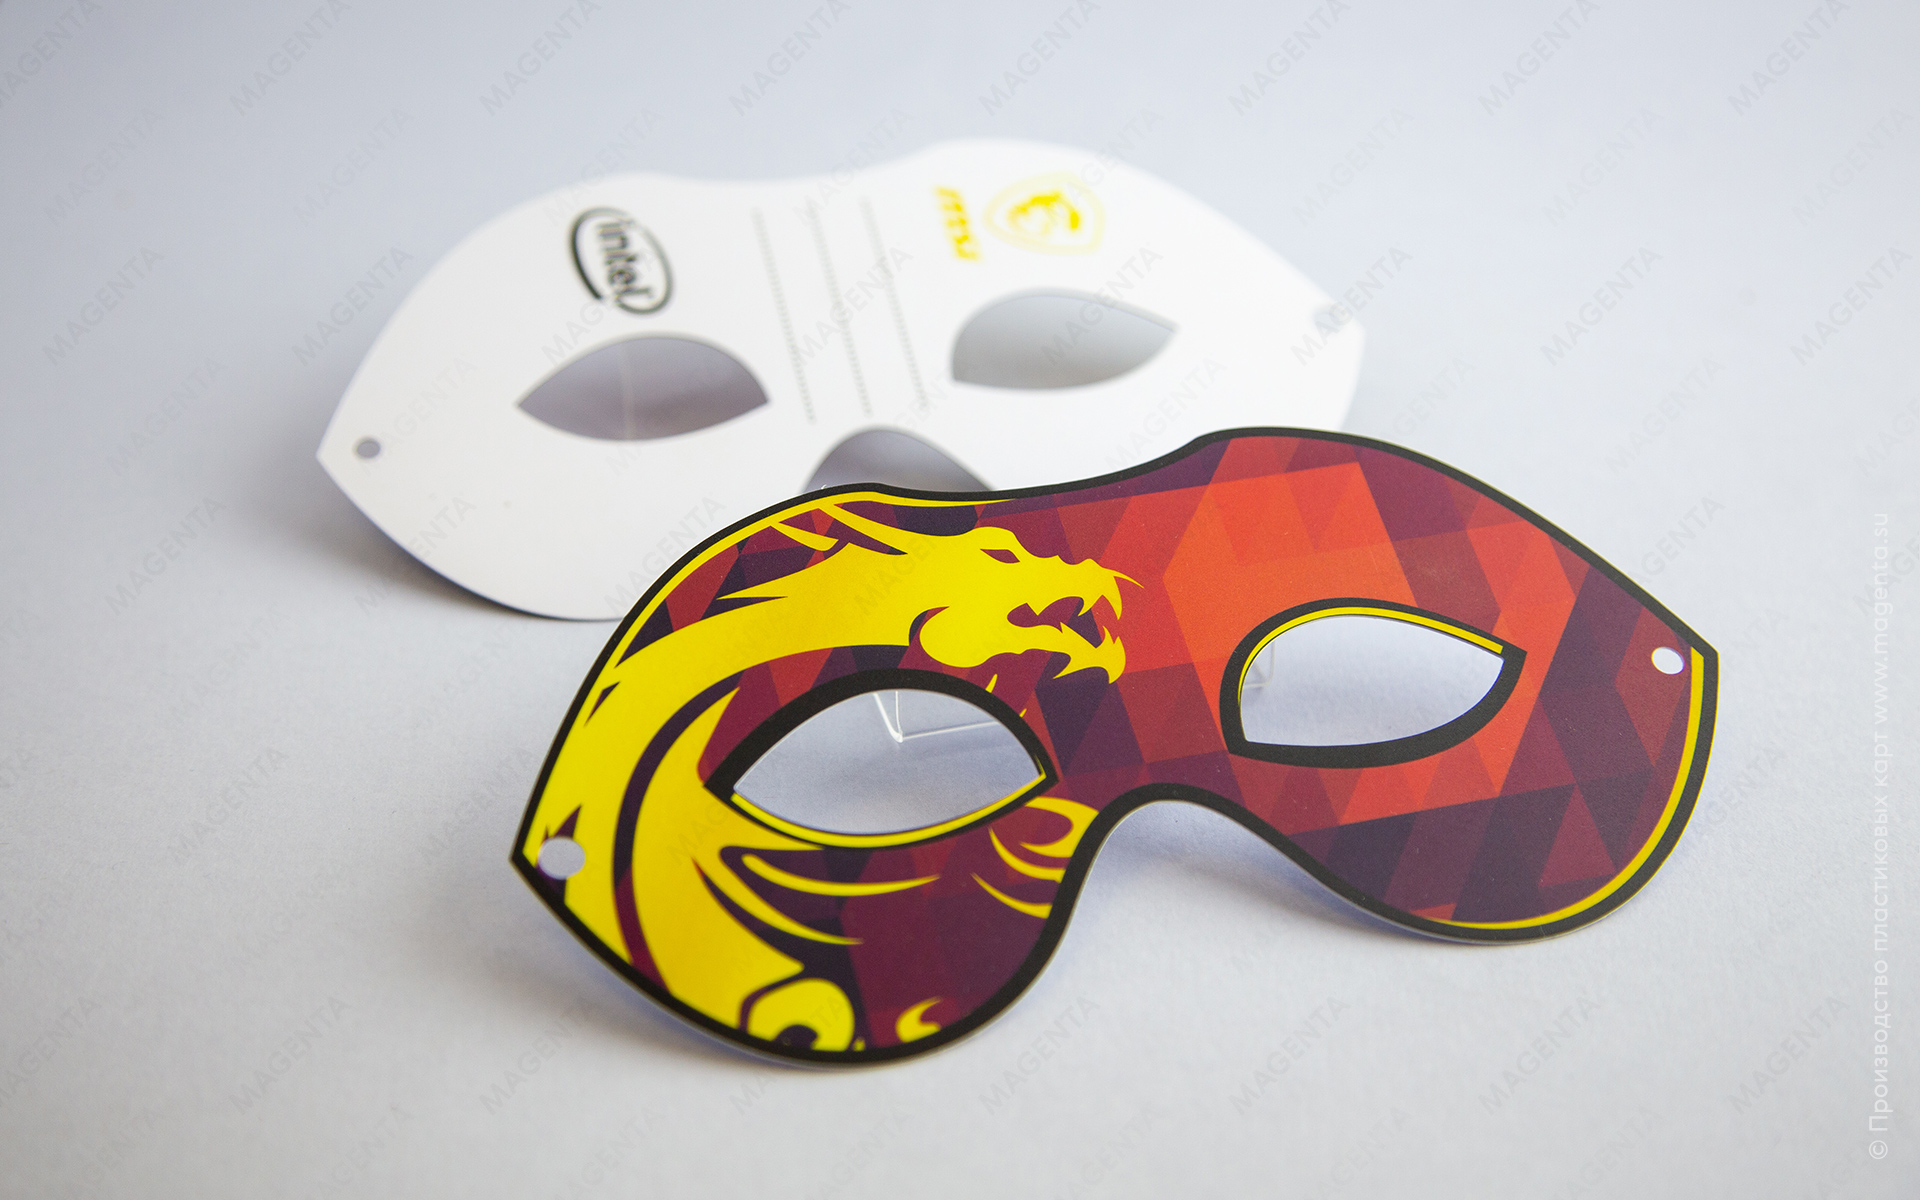 /crm_files/articles/badges/badge-mask-02_5cabadc9980c7_5f46795444ce0.jpg